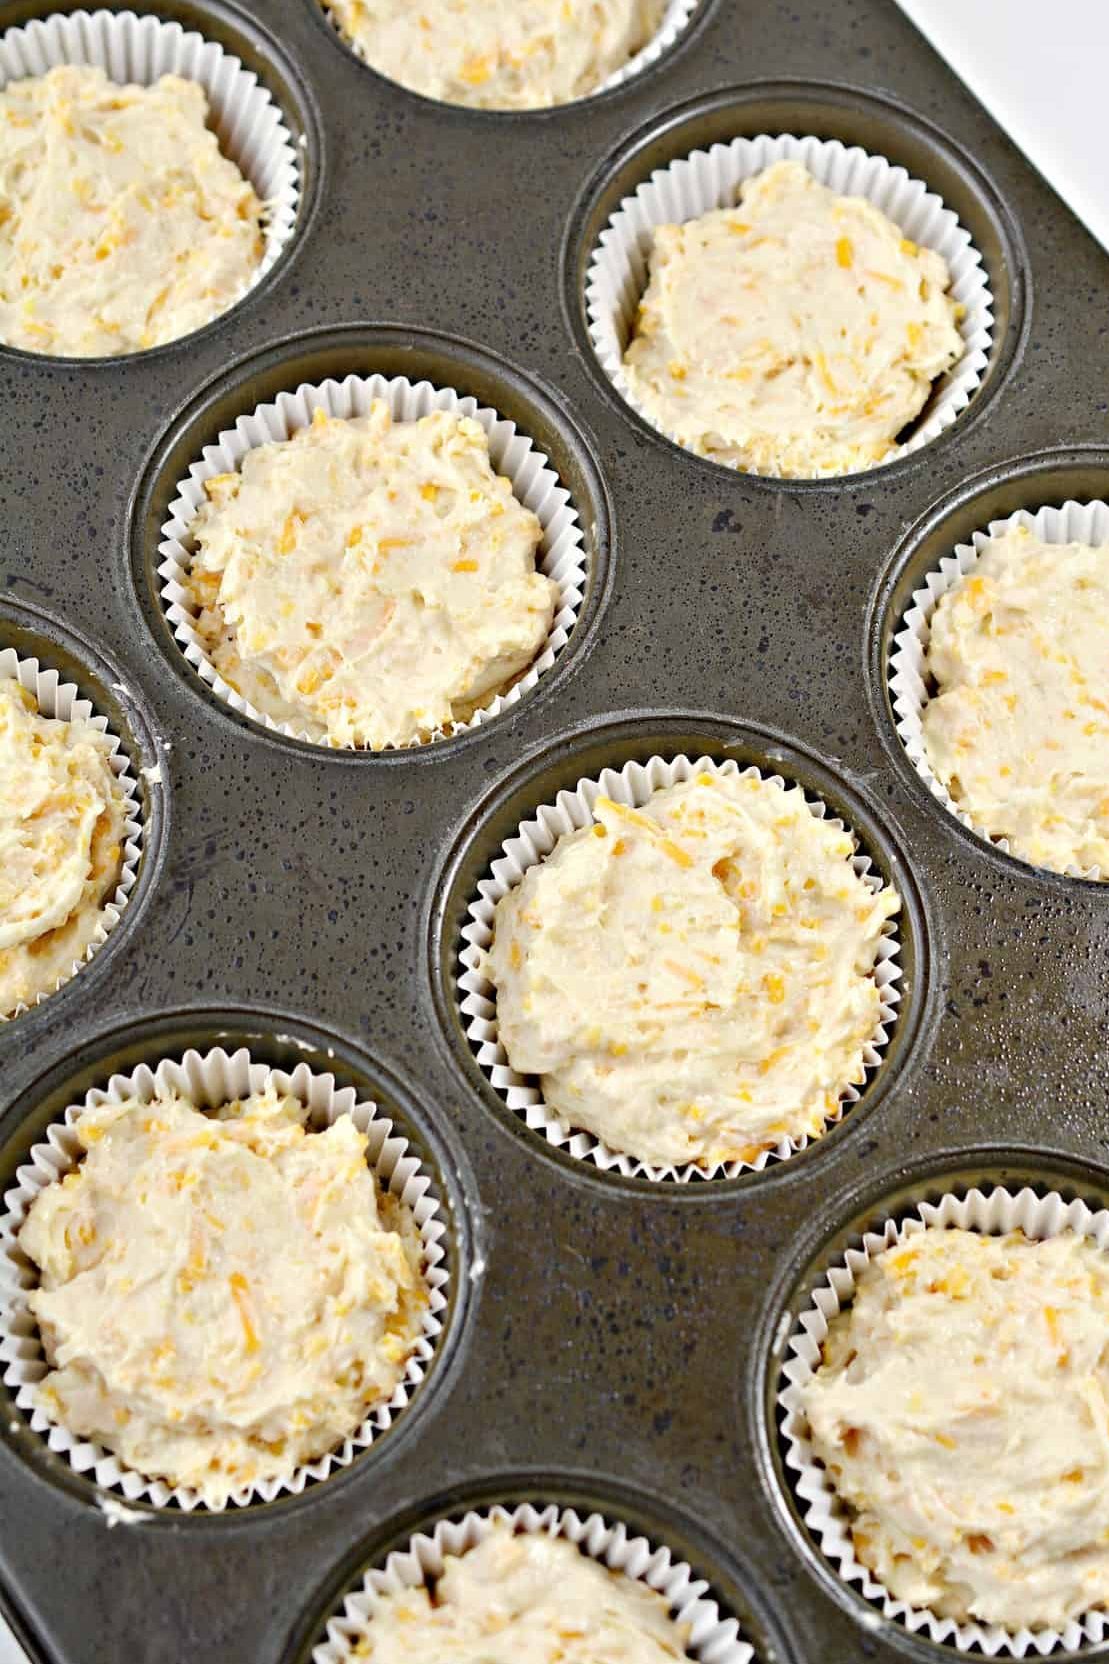 Spoon the batter into 12 sections of a muffin tin that have been well-greased or lined with cupcake liners. Fill each one to the top with the batter.